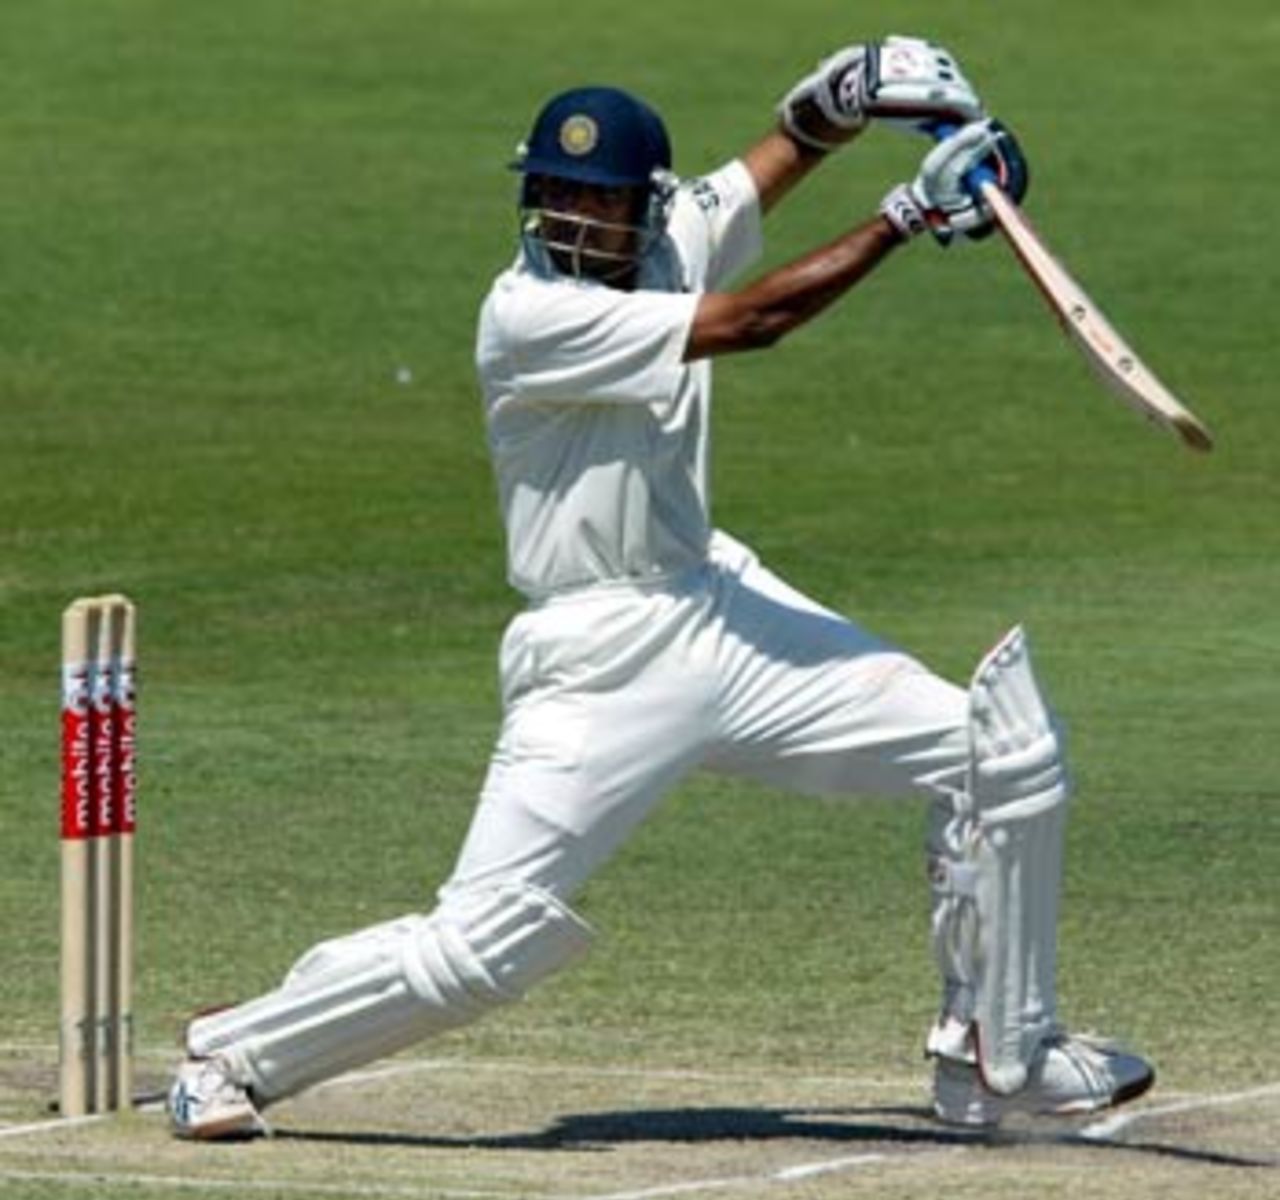 Dravid crashed the first ball of the fourth day for four, and reached 200, Australia v India, 2nd Test, Adelaide, 4th day, December 15, 2003